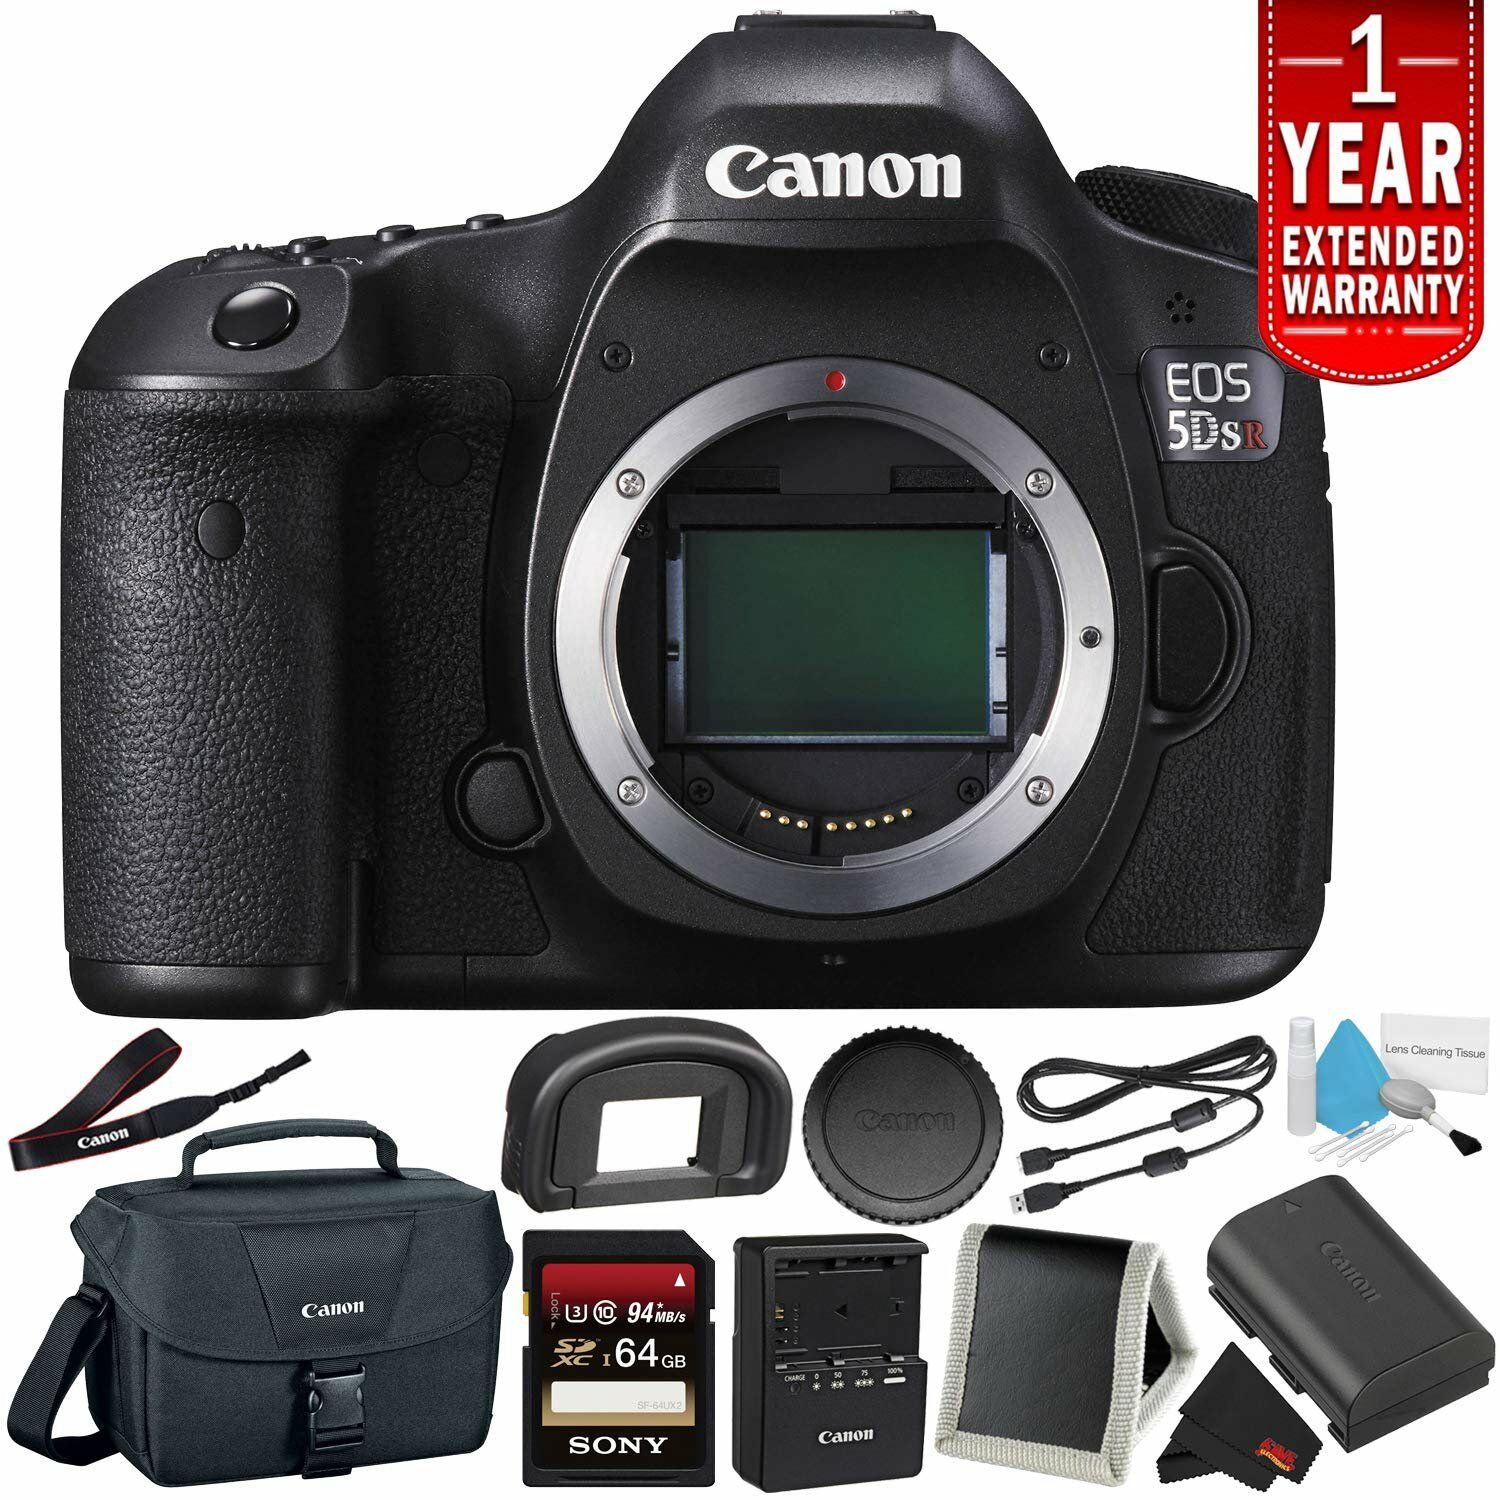 Canon EOS 5DS R Digital SLR Camera 0582C002 (Body Only) - Camera Bundle with 32GB Memory Card + with 1 Year Extended Warranty - image 1 of 4